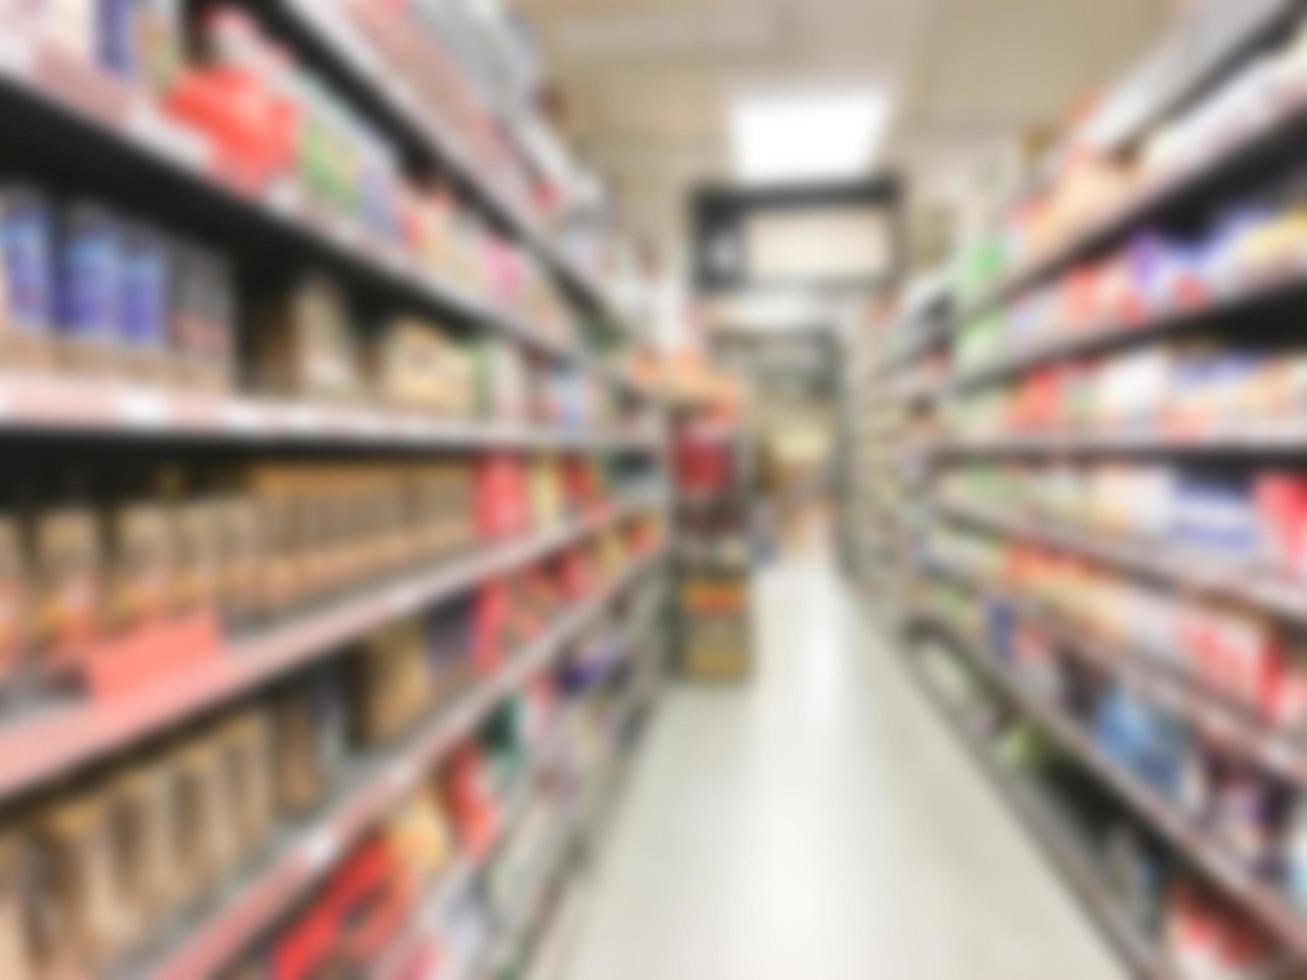 Abstract defocused supermarket interior for background photo